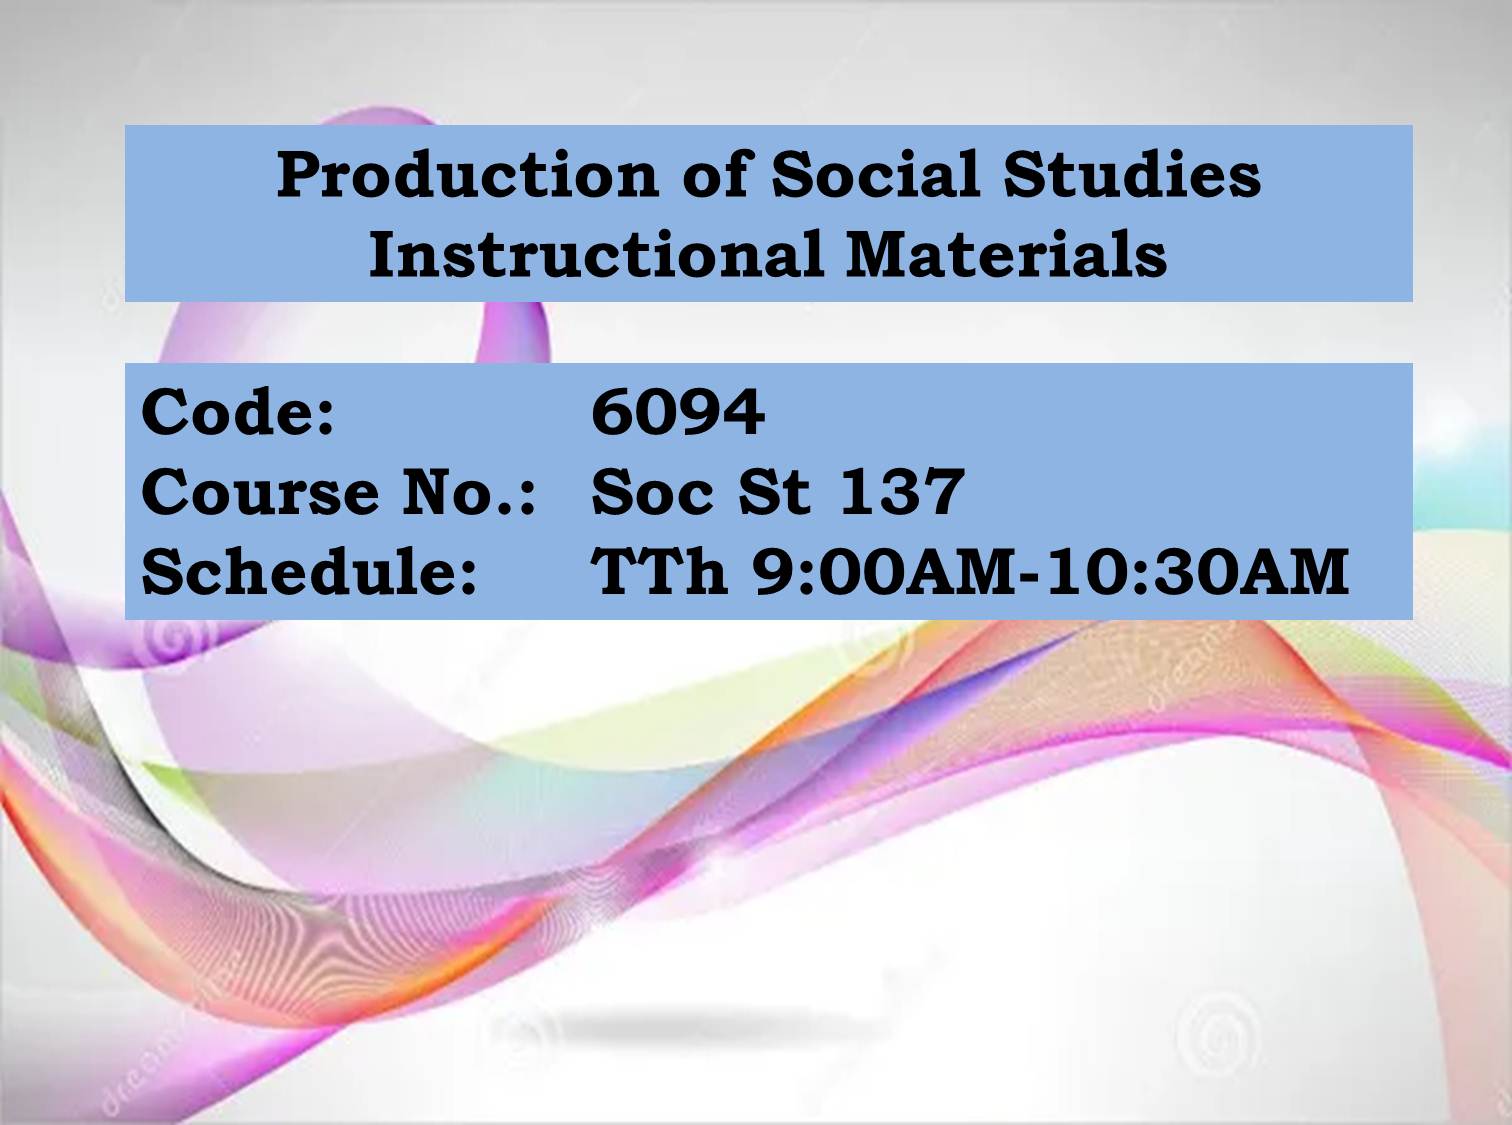 Production of Social Studies Instructional Materials